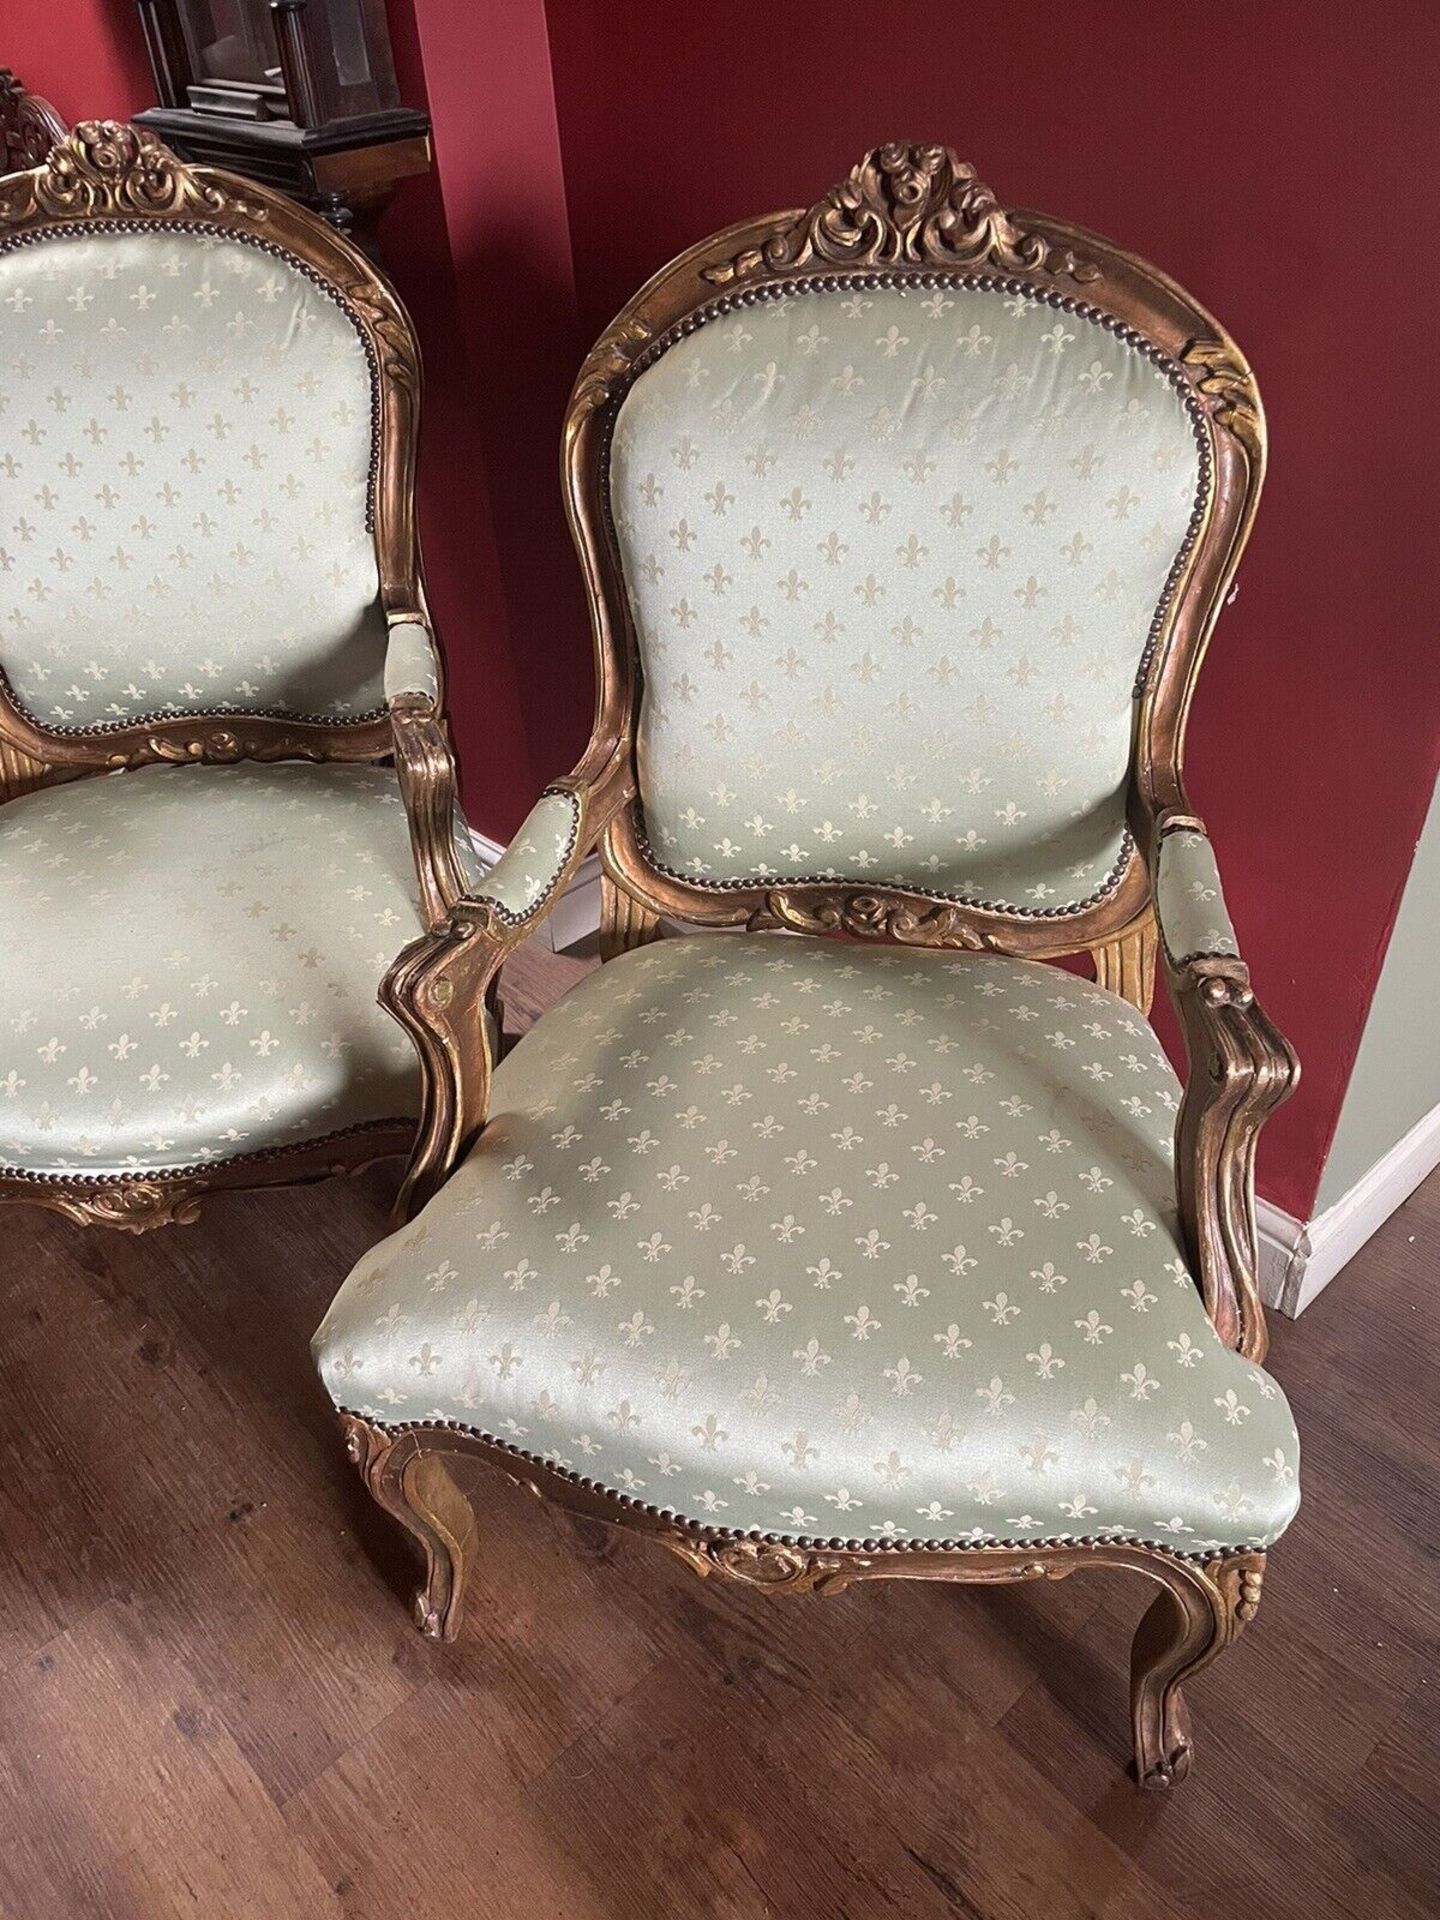 A Pair of Fauteuils In Louis XVI Style Carved Gilt Wood Arm Chairs Upholstered In Fleur De Lys - Image 8 of 10